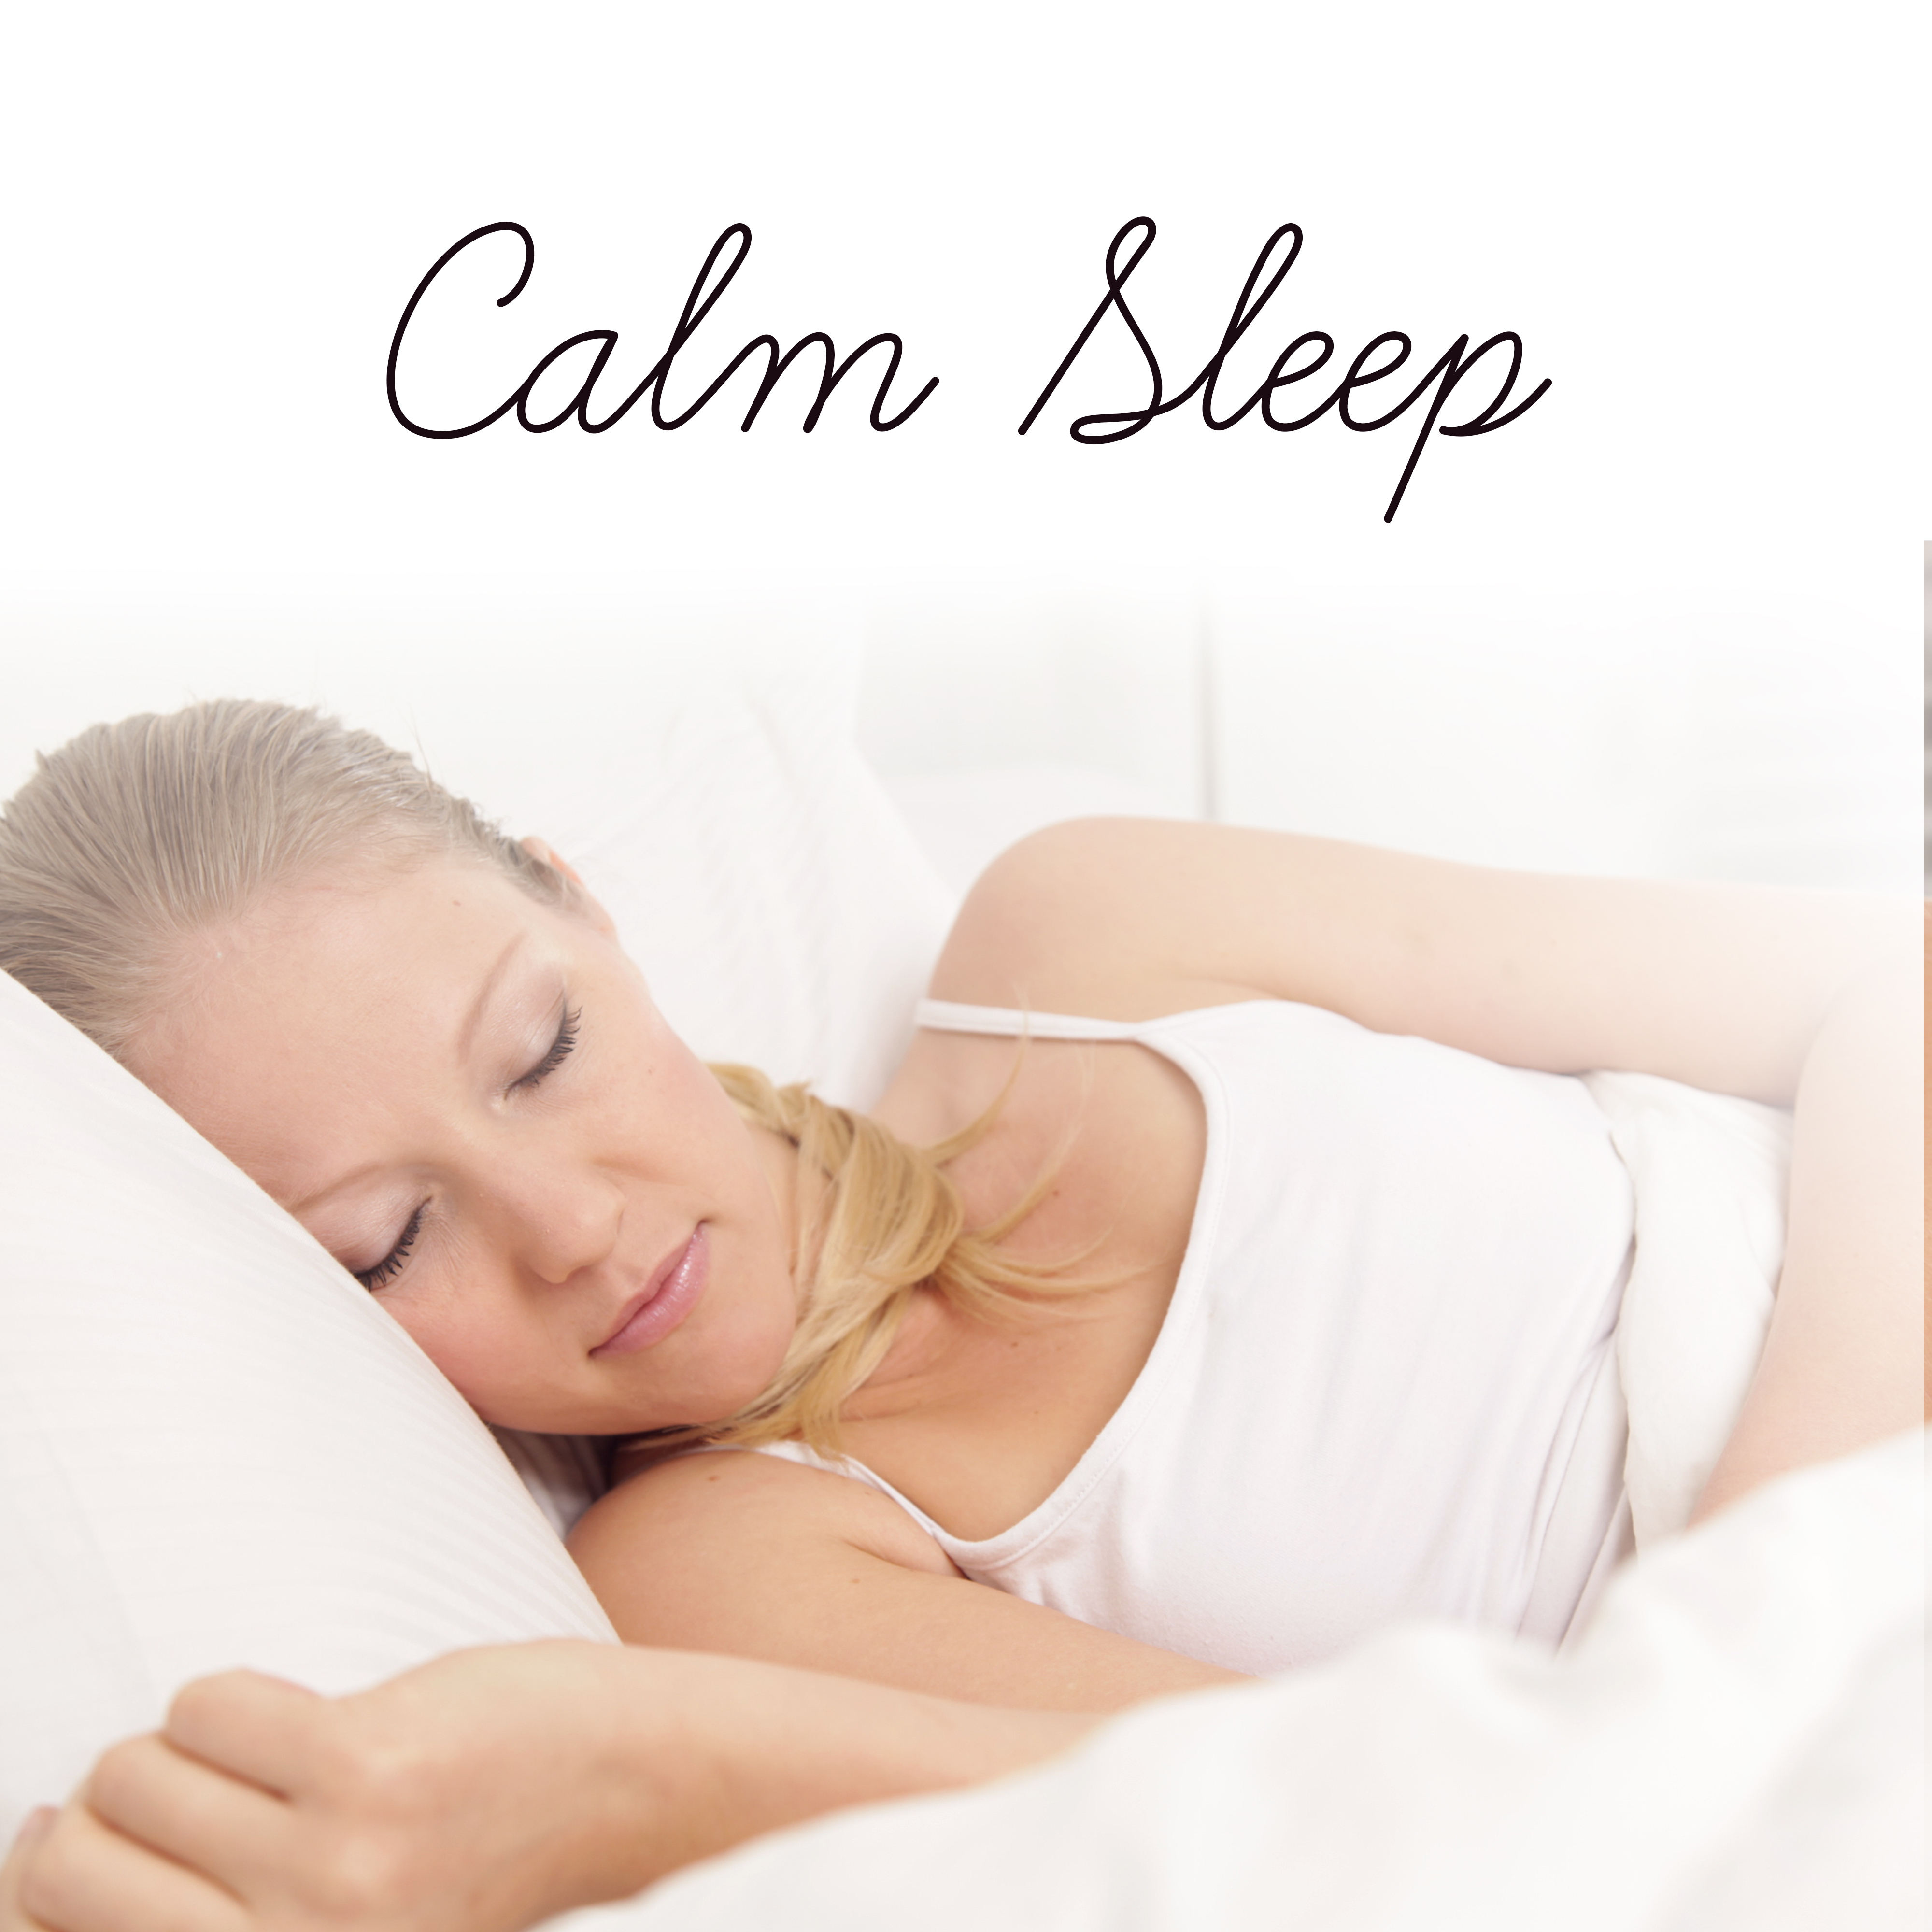 Calm Sleep – Soft Music to Bed, Relaxing Therapy at Night, Lullabies, Pure Sleep, Peaceful Mind, Soothing Water, Rain